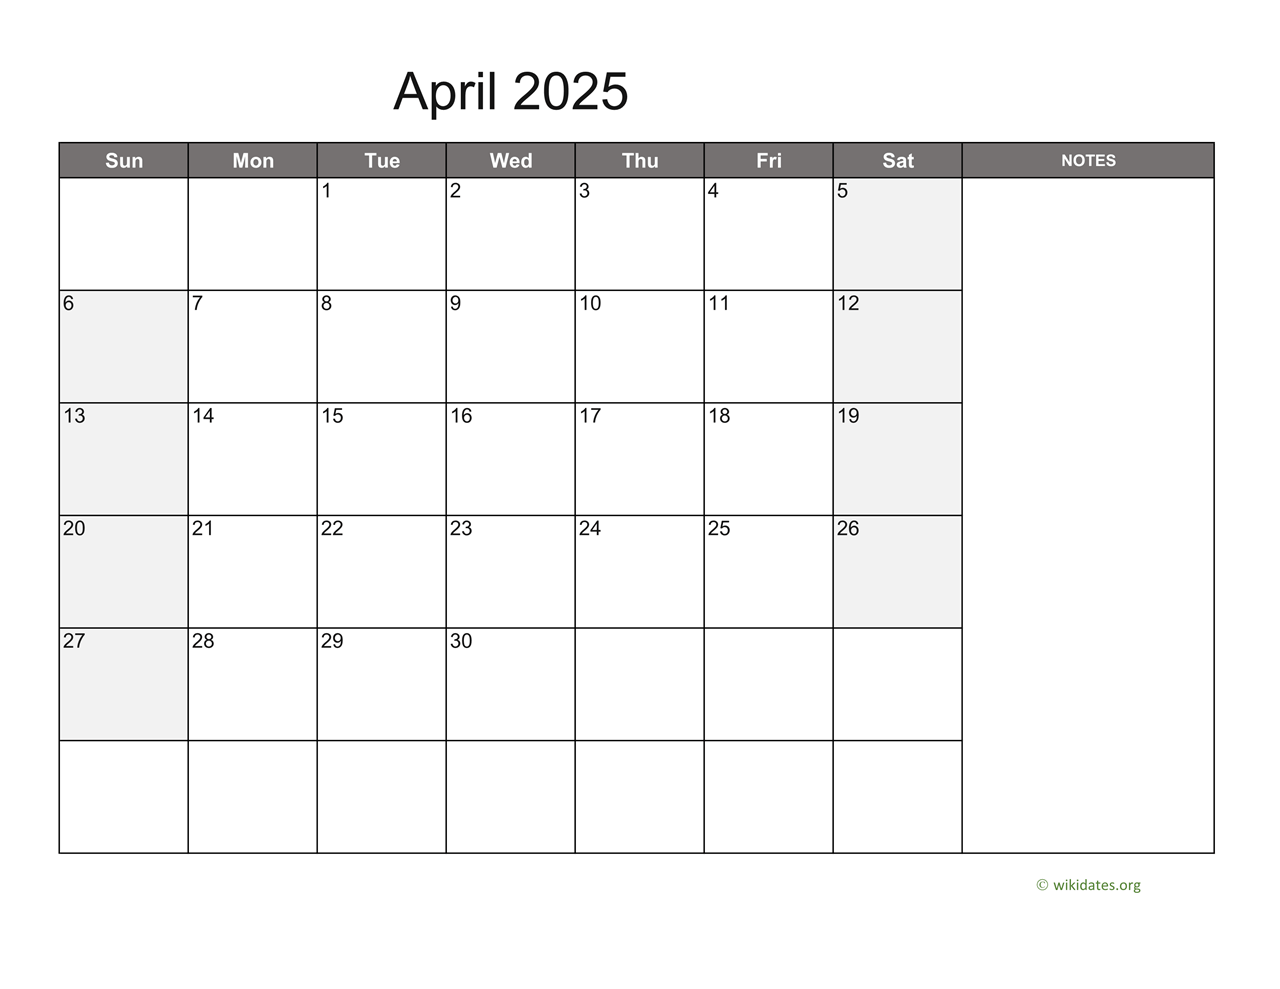 april-2025-calendar-with-notes-wikidates